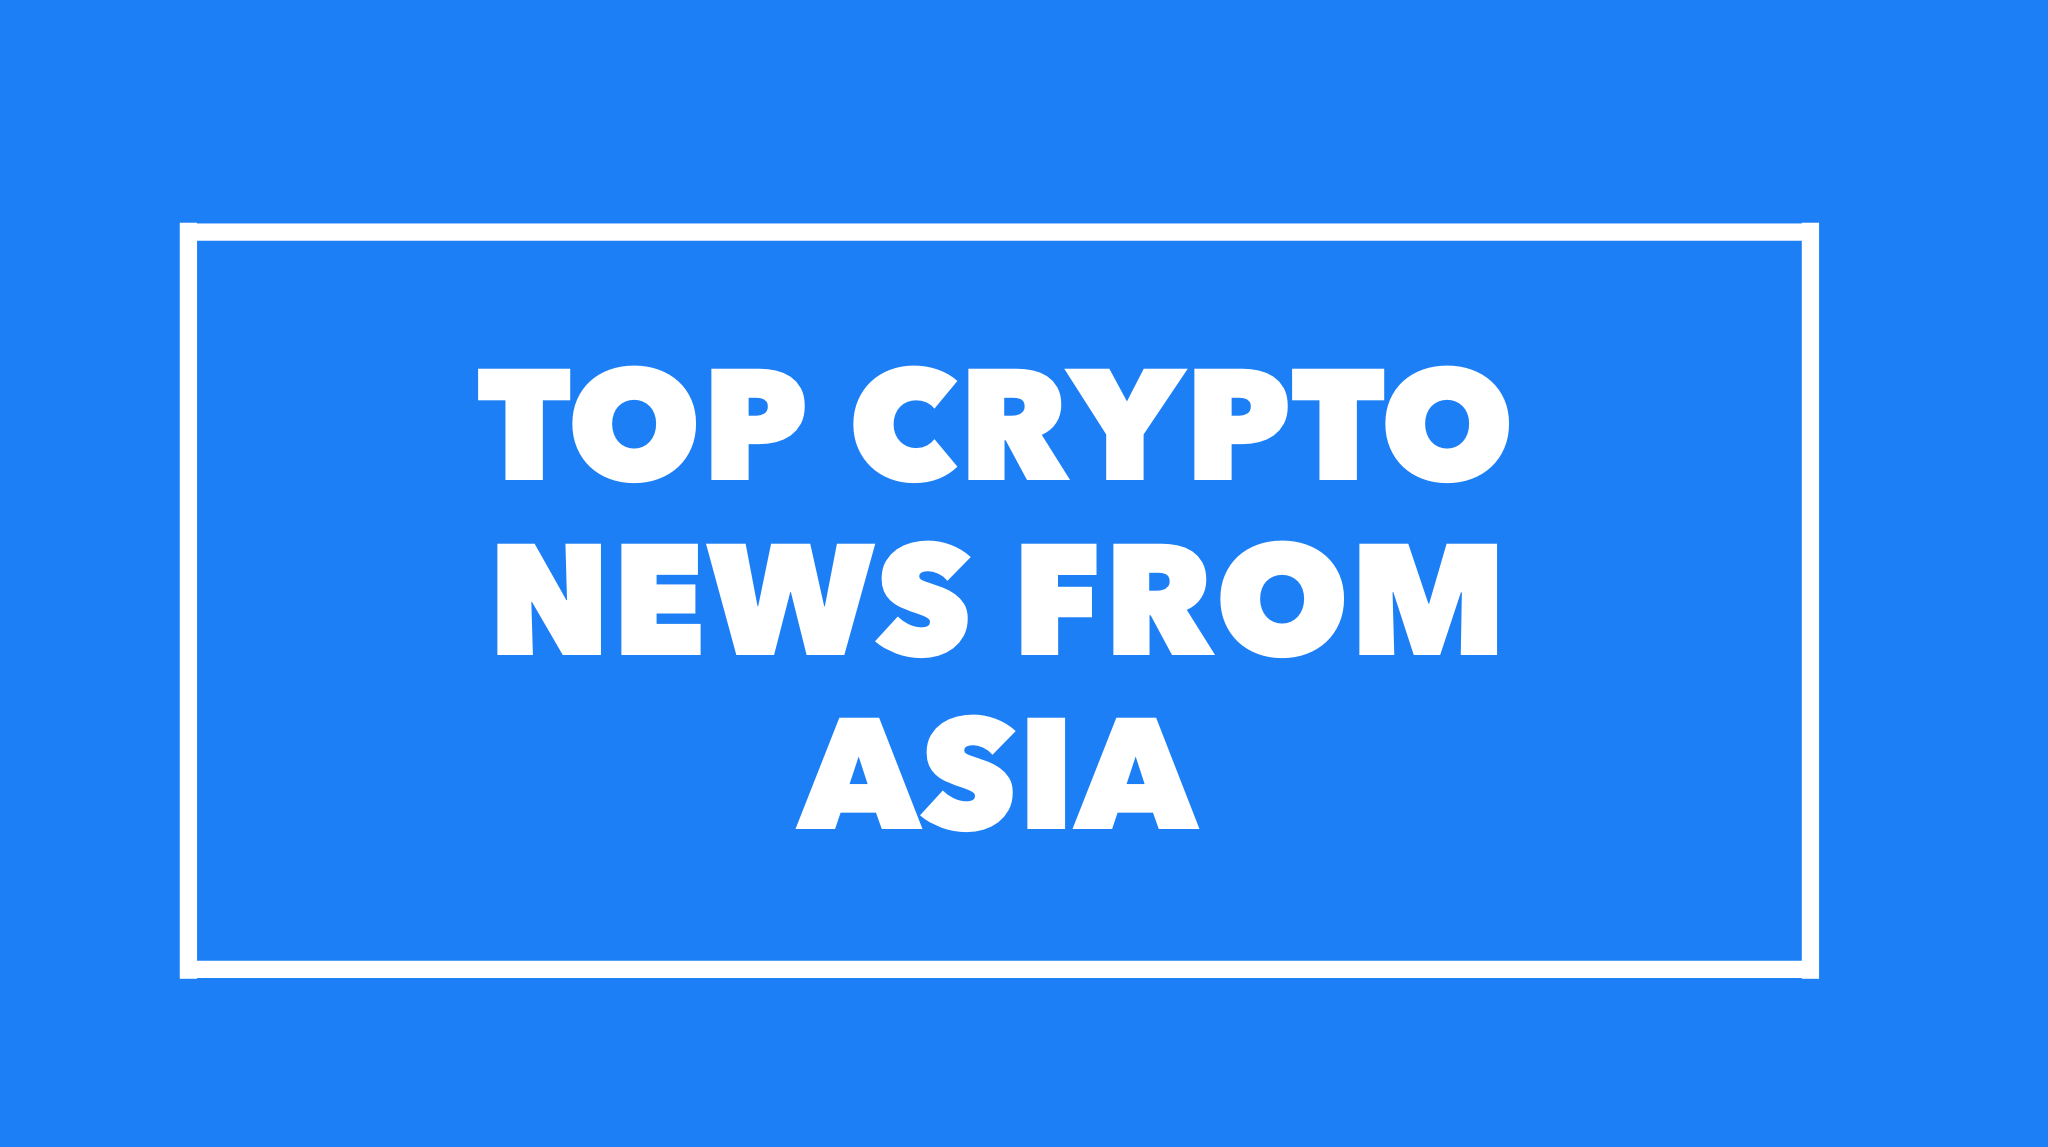 Top Crypto News in Asia: Sept 13- Sept 16